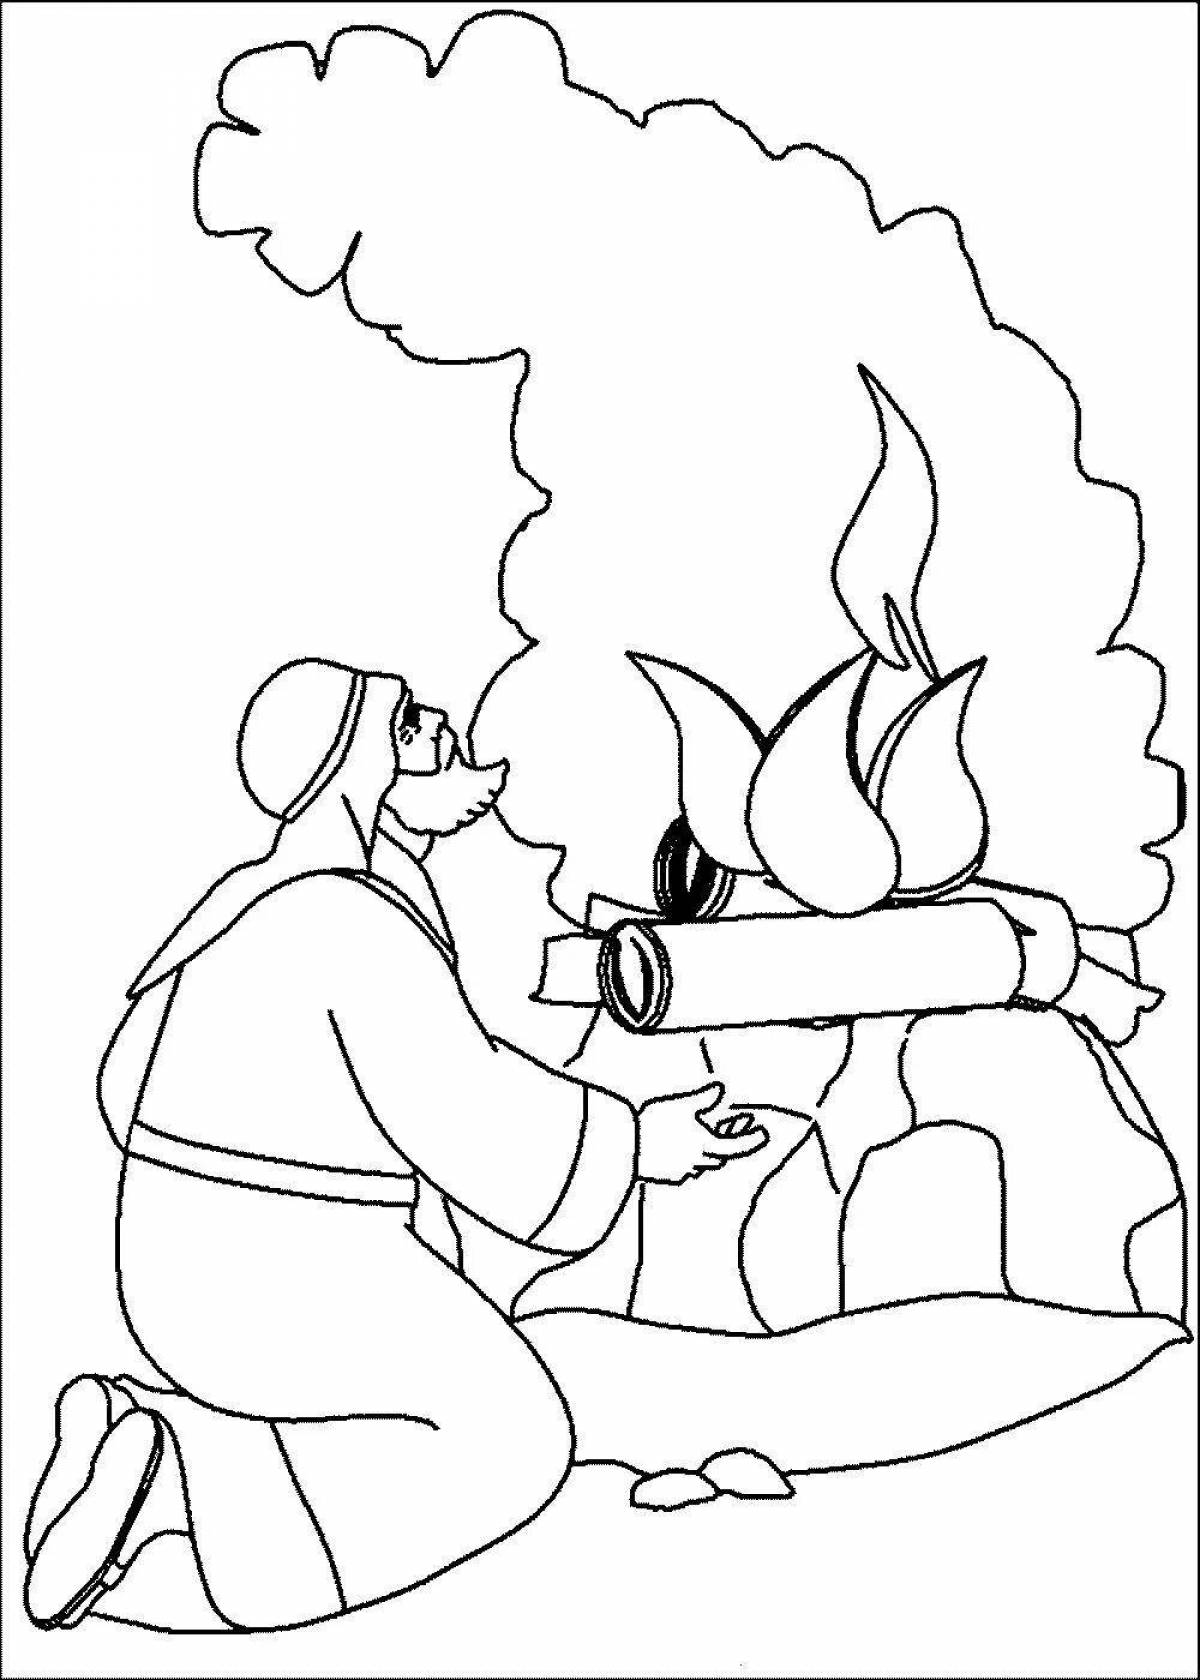 Color-frenzy fire friend coloring page